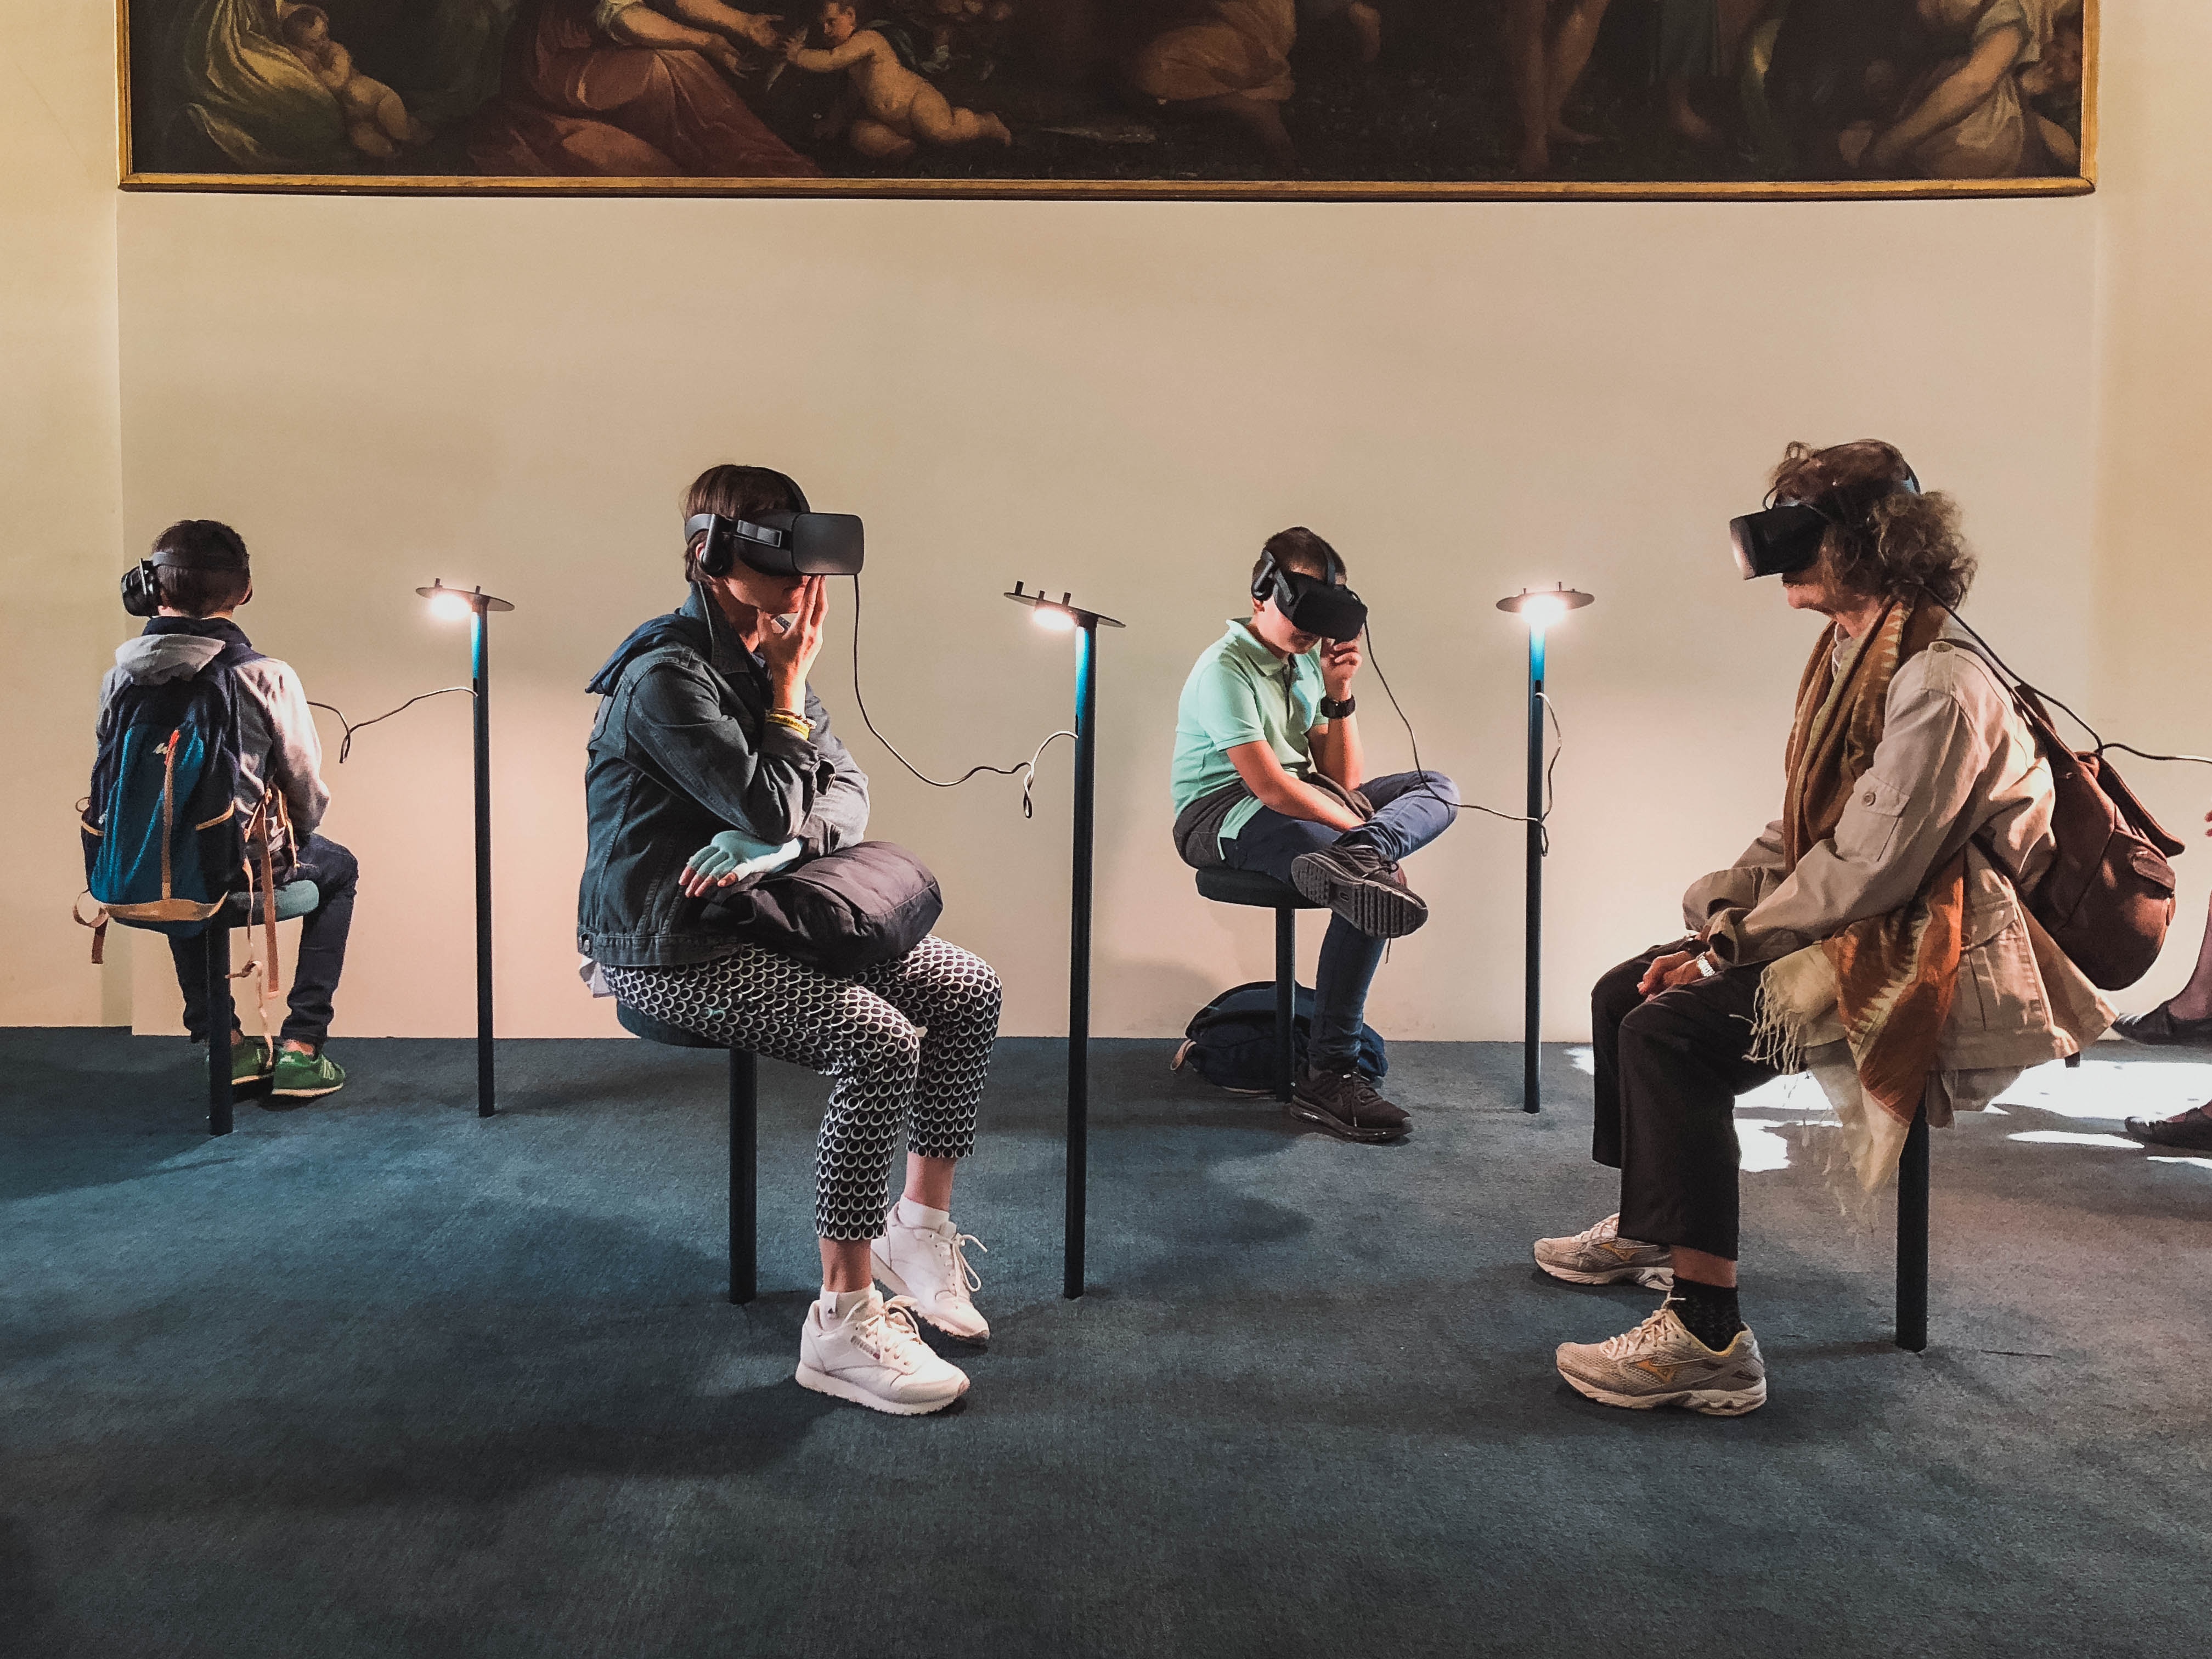 four people sitting in a room
wearing virtual reality headsets
wired to posts next to them,
and all facing different directions
